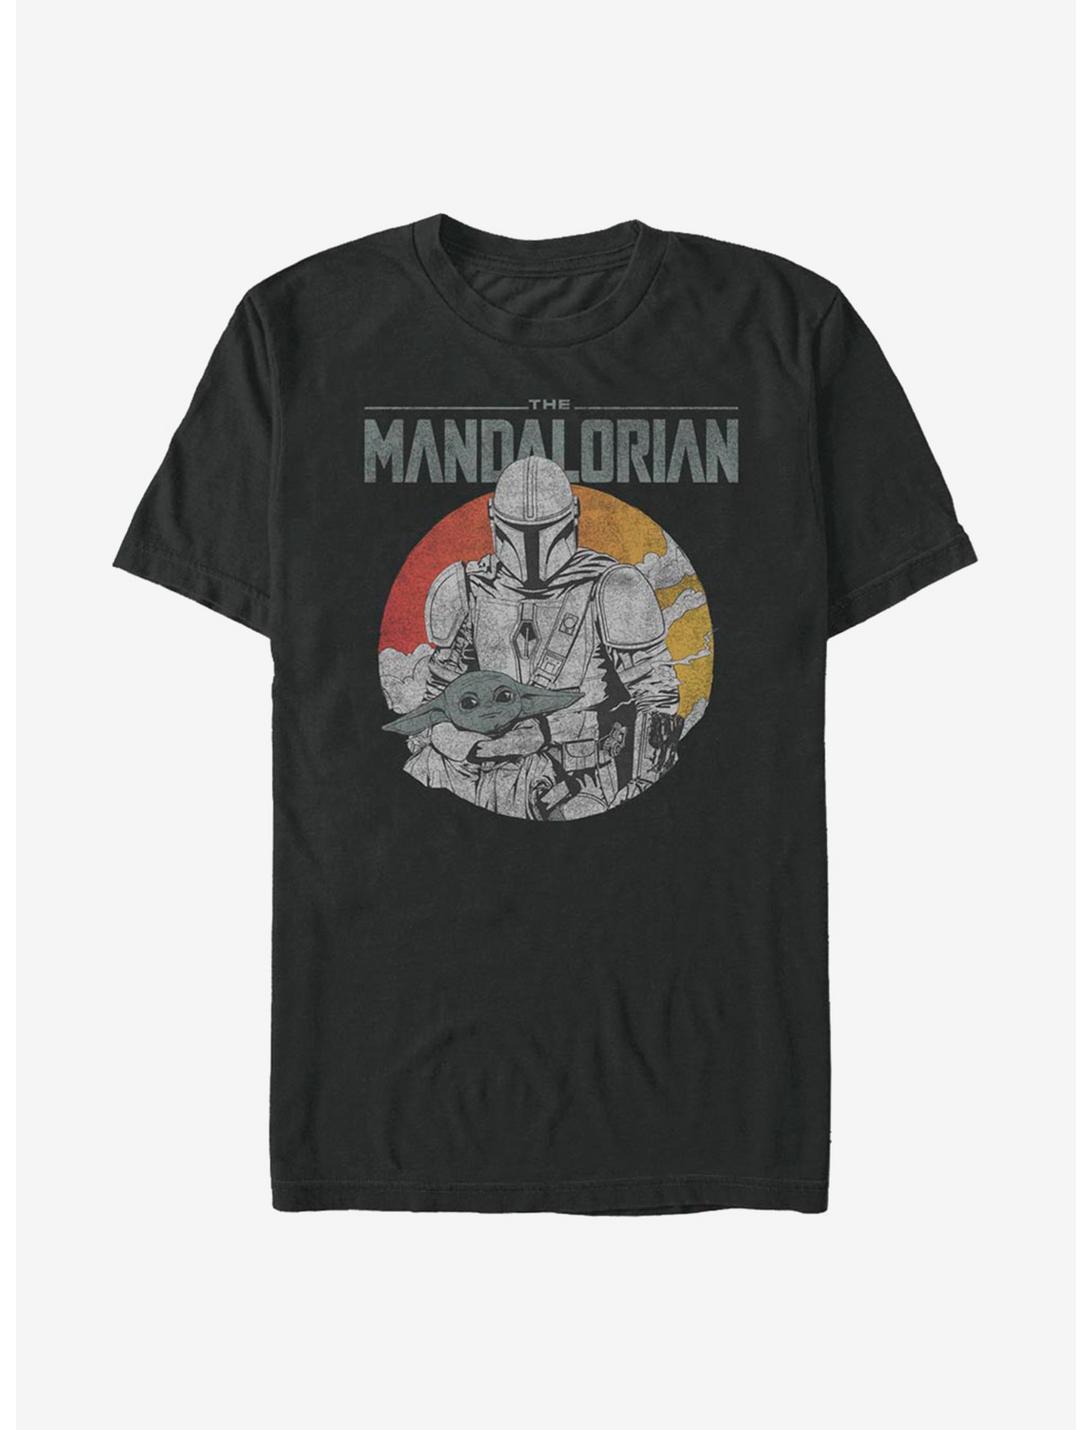 Star Wars The Mandalorian Rider With The Child T-Shirt, BLACK, hi-res